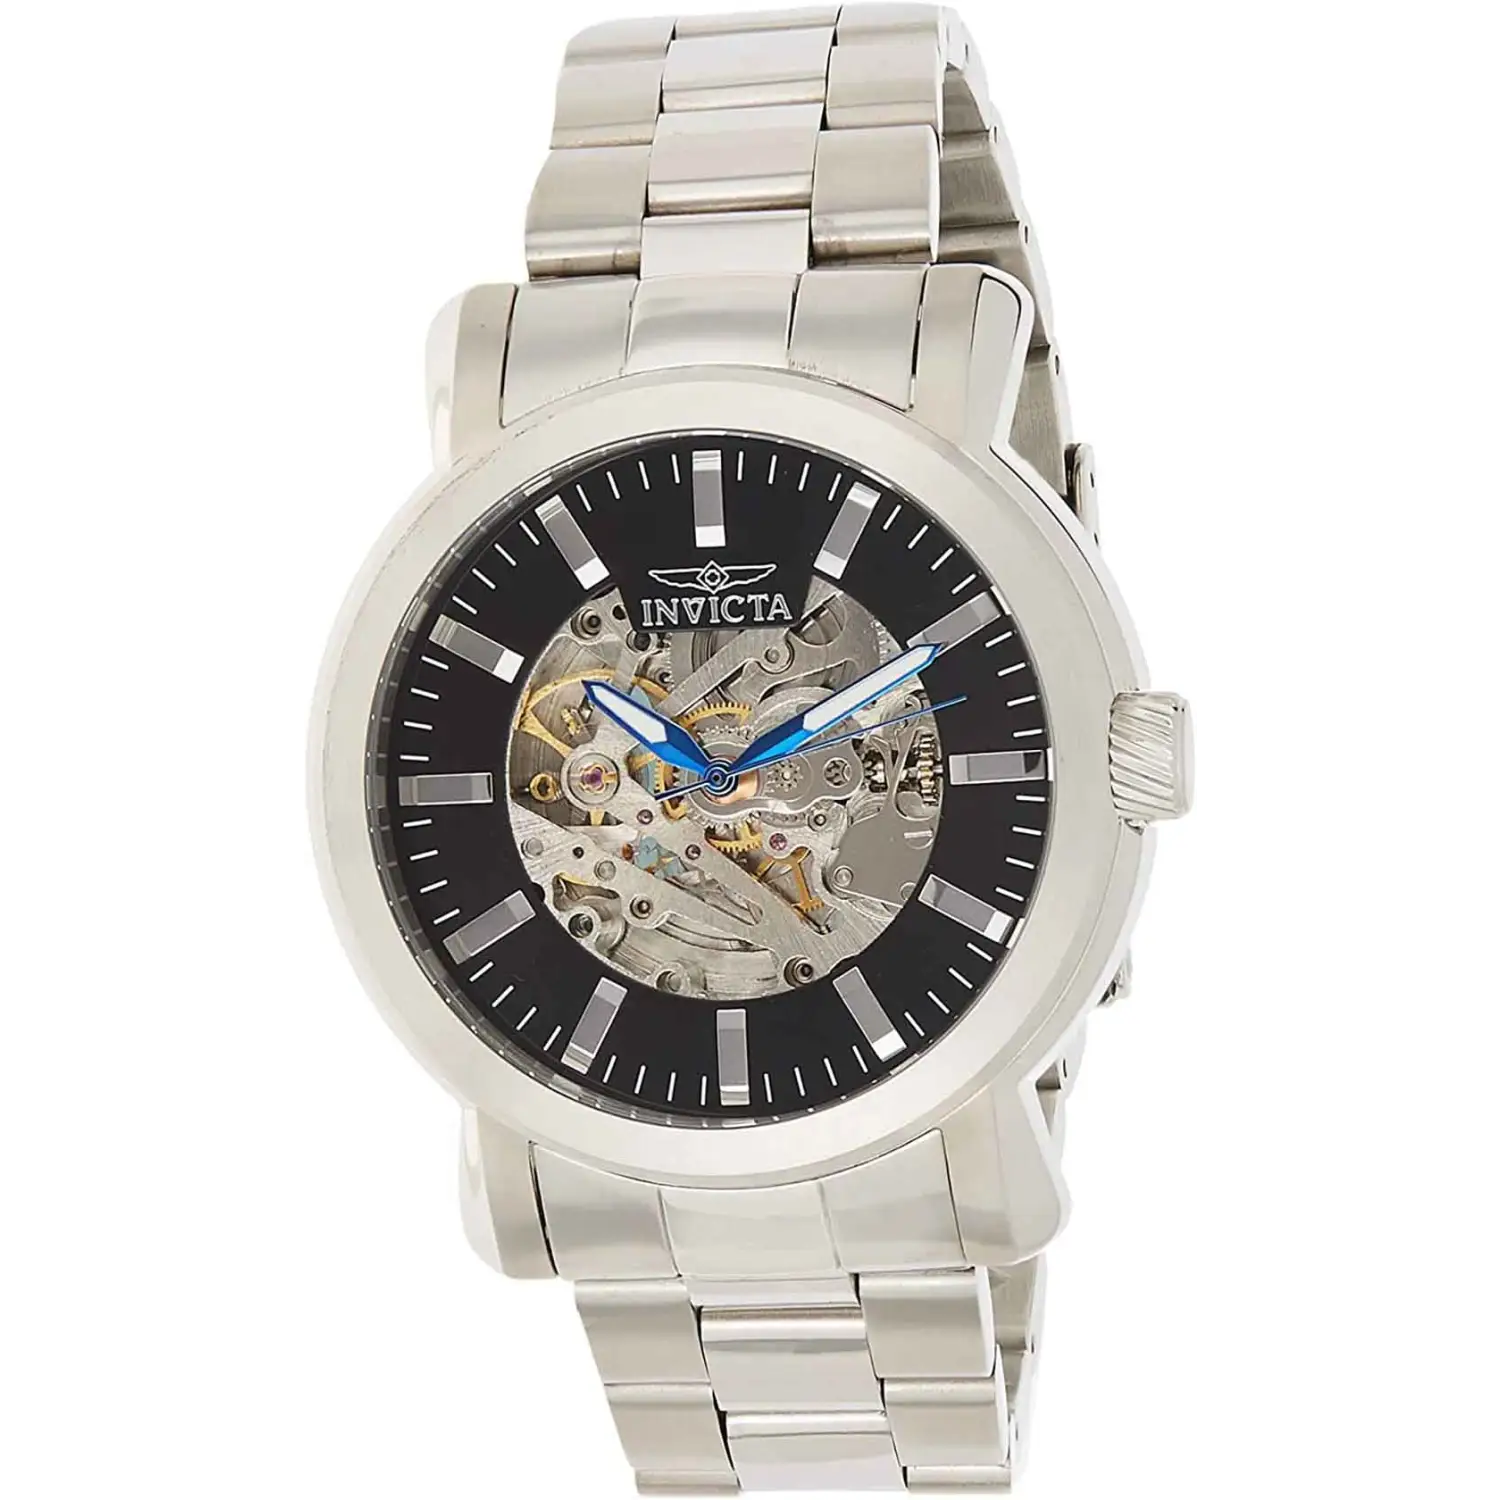 Invicta Men’s Vintage Automatic Stainless Steel Watch 22574